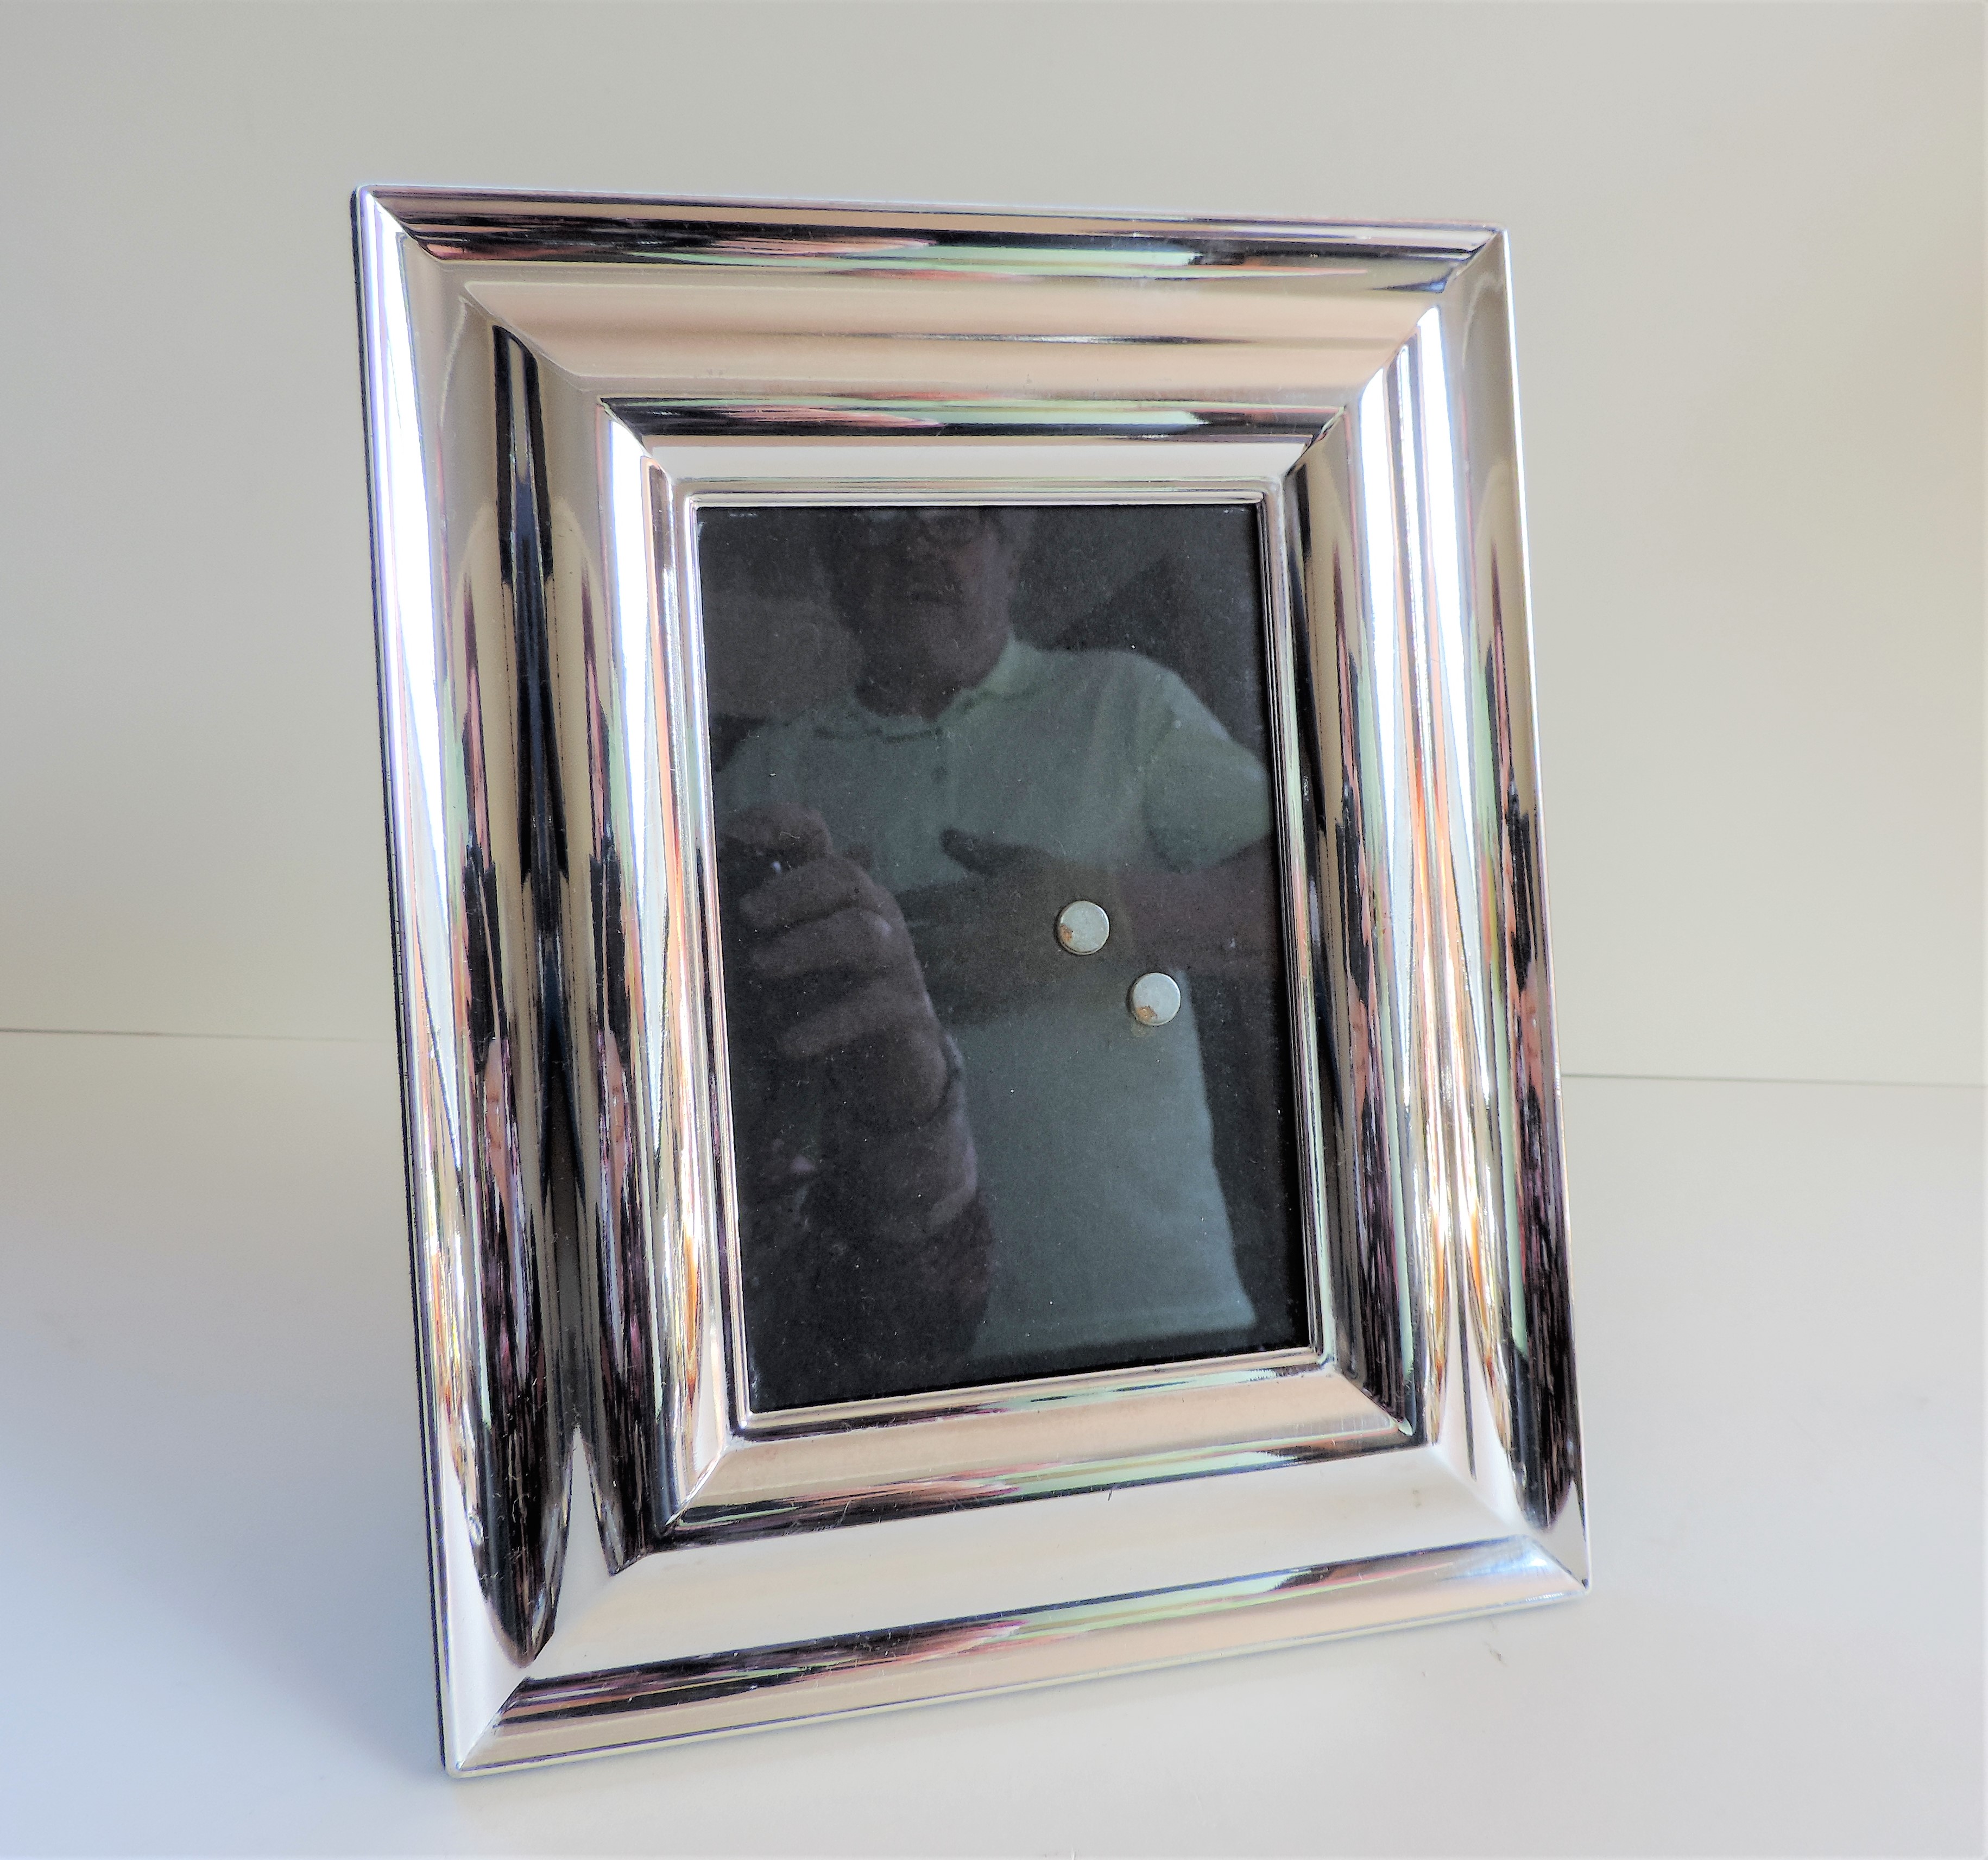 Silver Plated Photo Frame 25cm x 19cm - Image 2 of 2